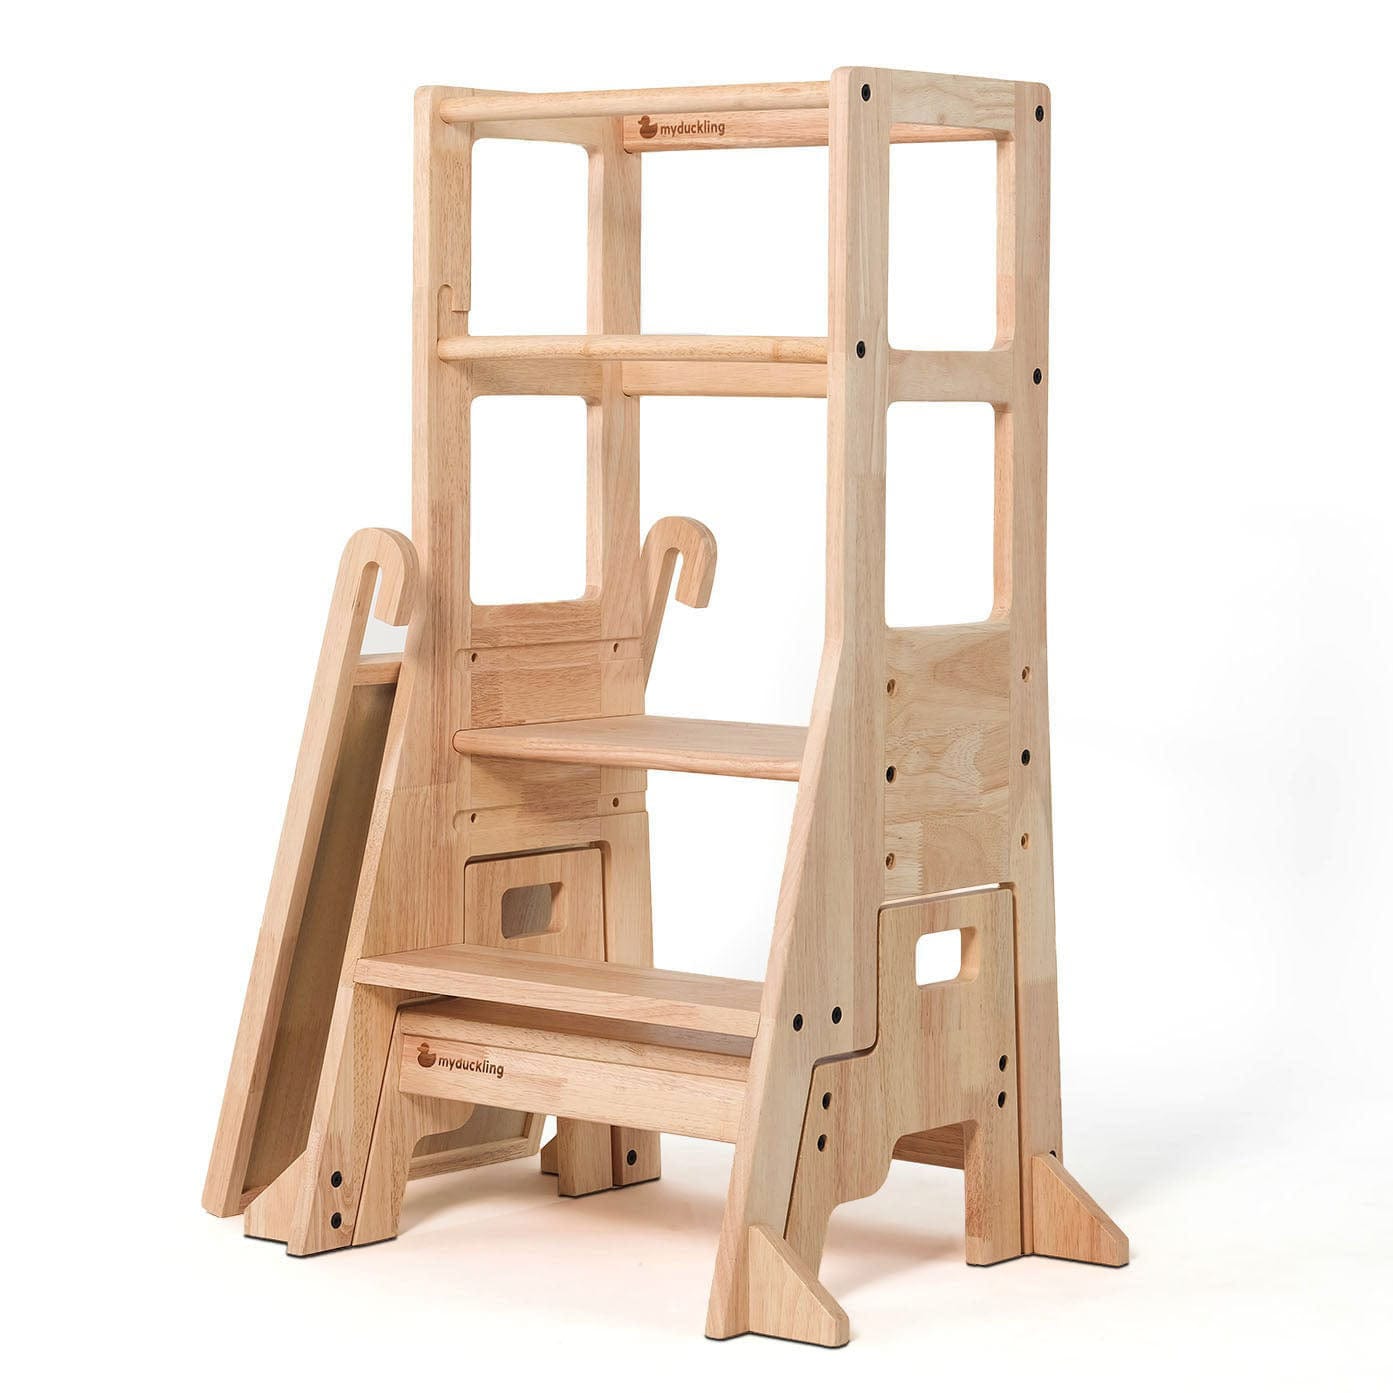 My Duckling JALA Deluxe Solid Wood Adjustable Learning Tower - Rectangle Stool Handle